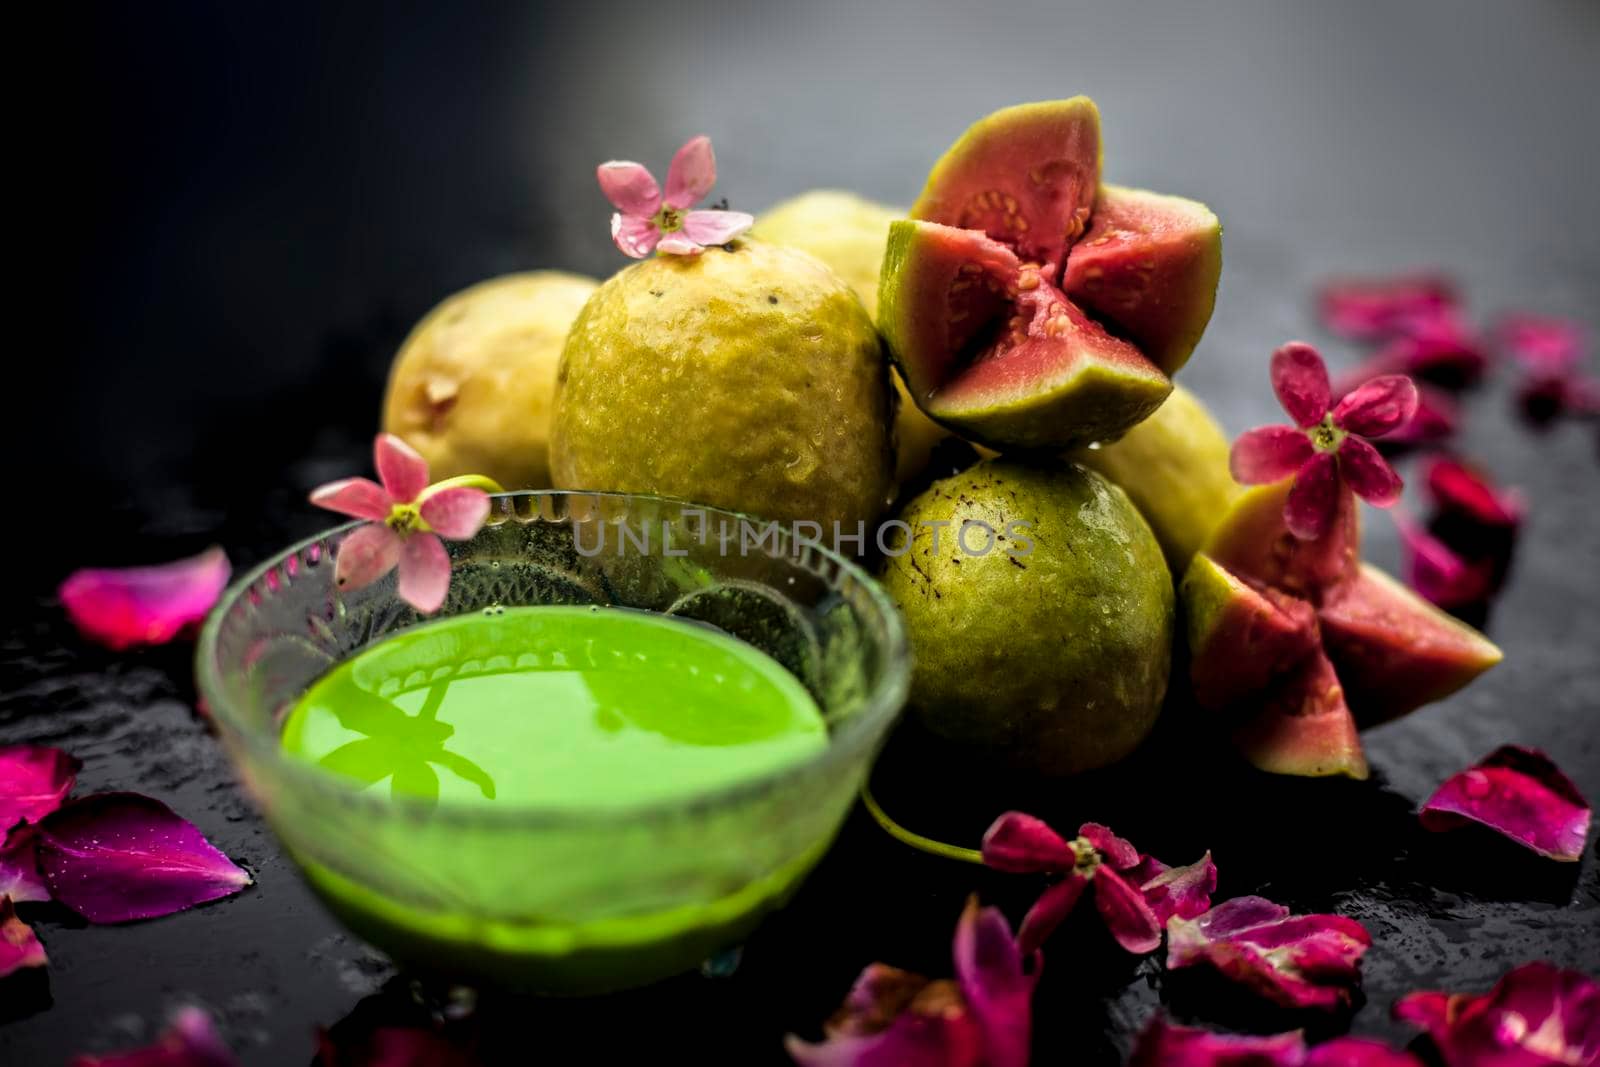 Guava, Neem or Indian lilac leaves, turmeric powder well mixed in a glass bowl for treatment of pimples and acne in the spa by beauticians.